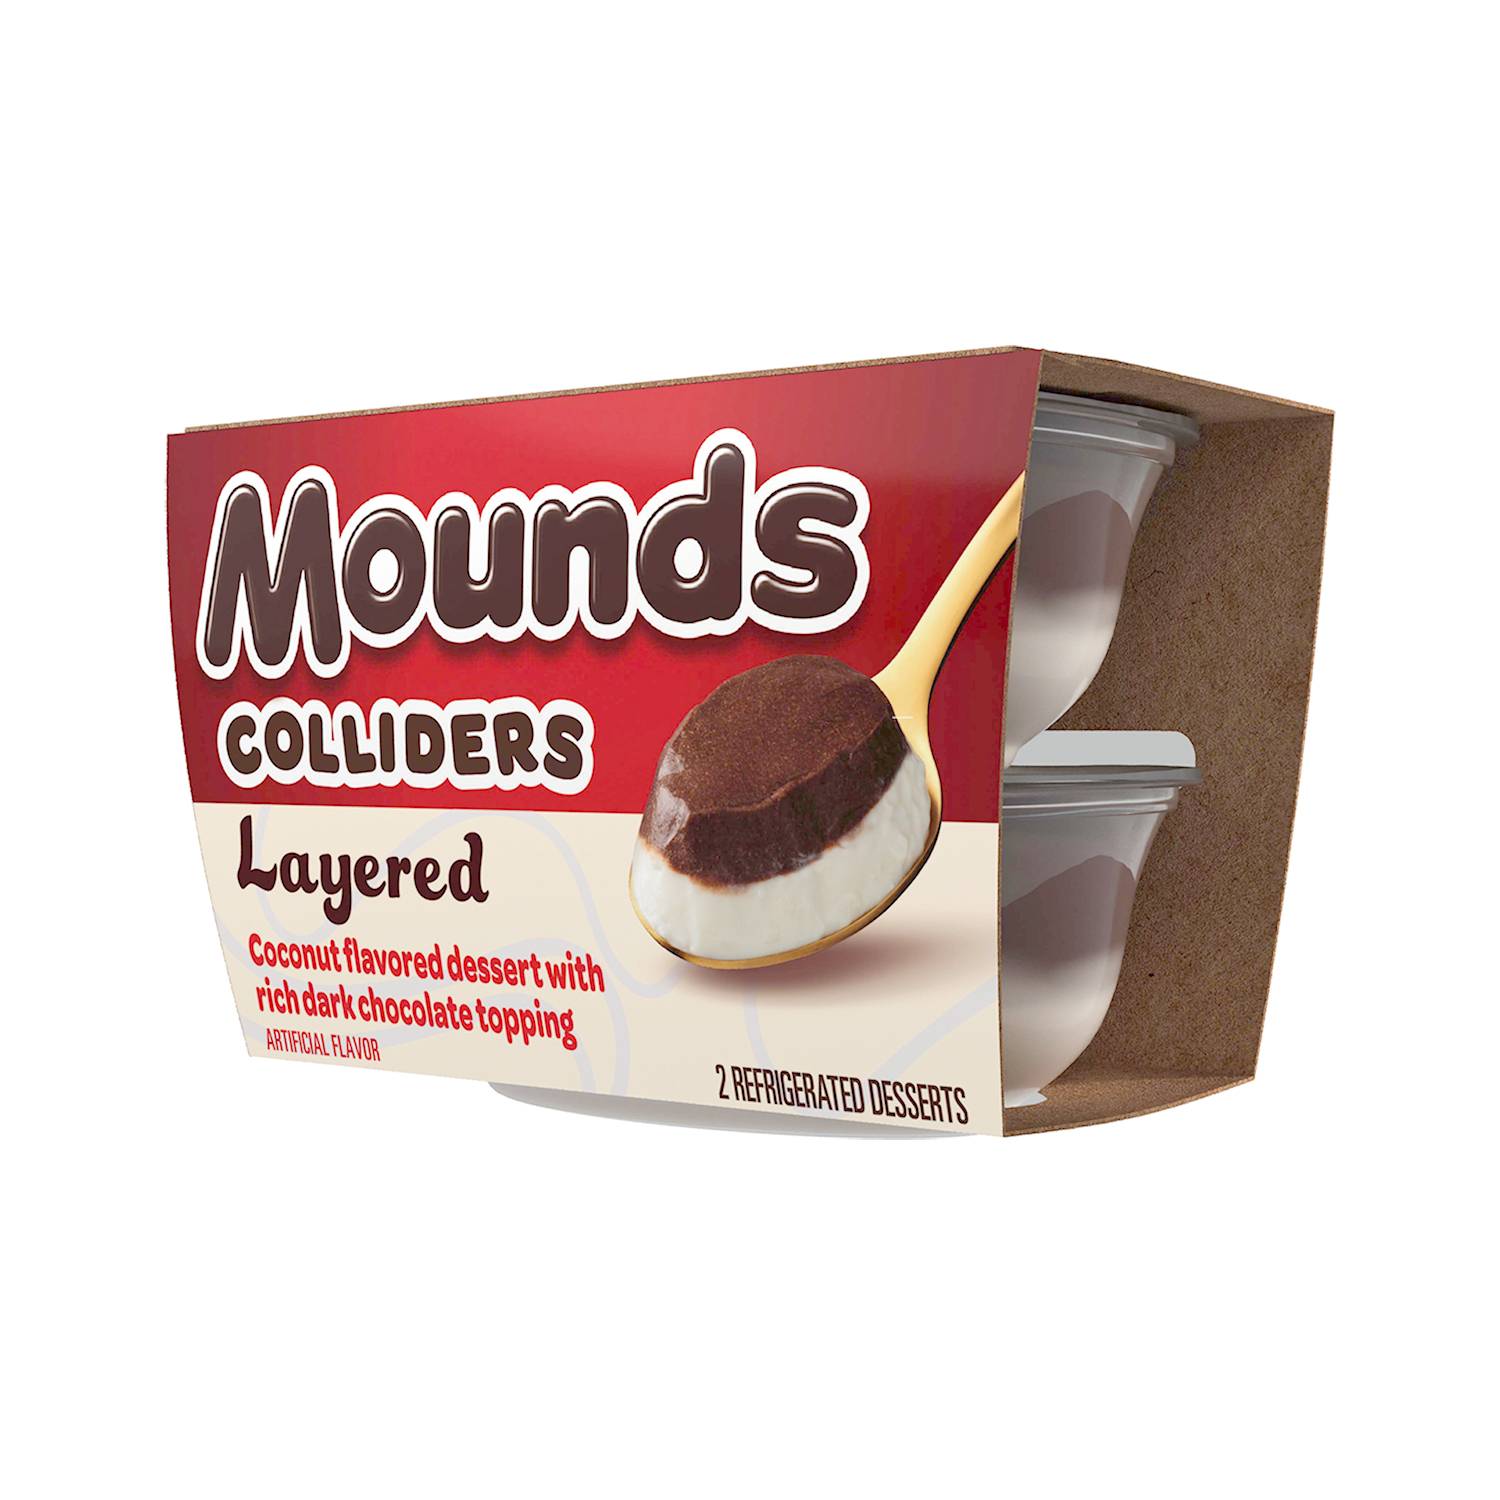 MOUNDS COLLIDERS™ Layered Dessert, 7 oz, 2 pack - Right of Package